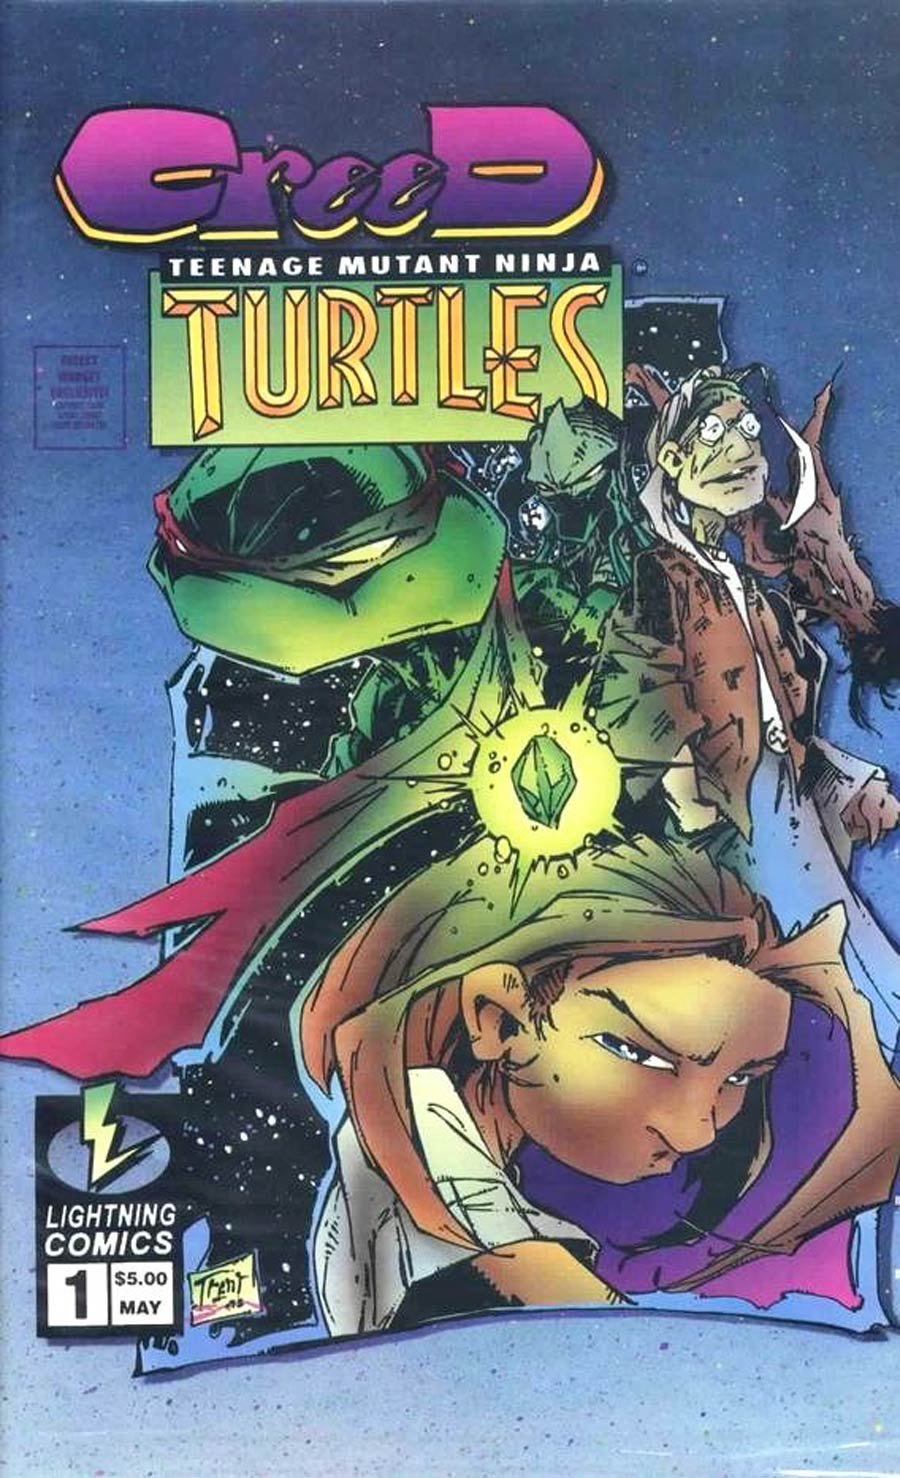 Creed Teenage Mutant Ninja Turtles #1 Cover D American Entertainment Exclusive Edition Polybagged